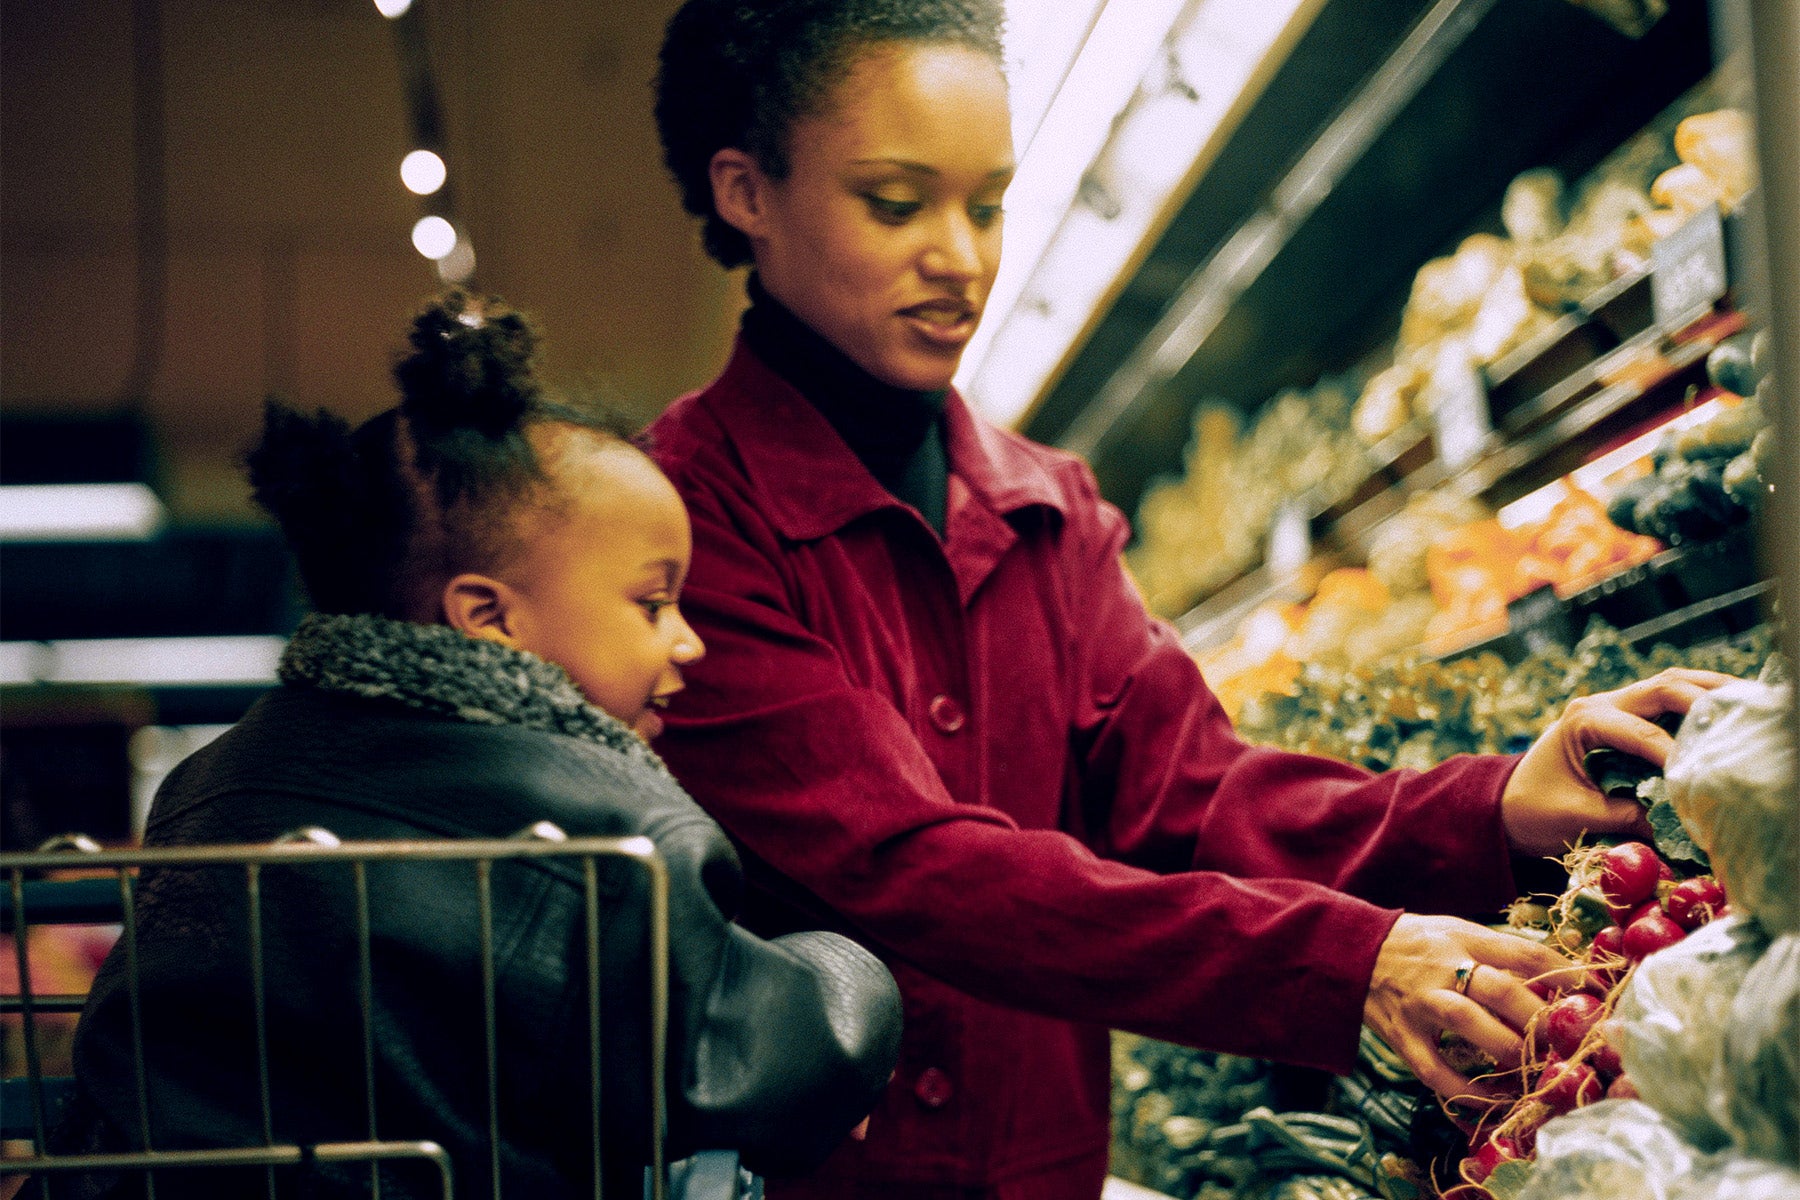 Black woman and child grocery shopping in produce section.